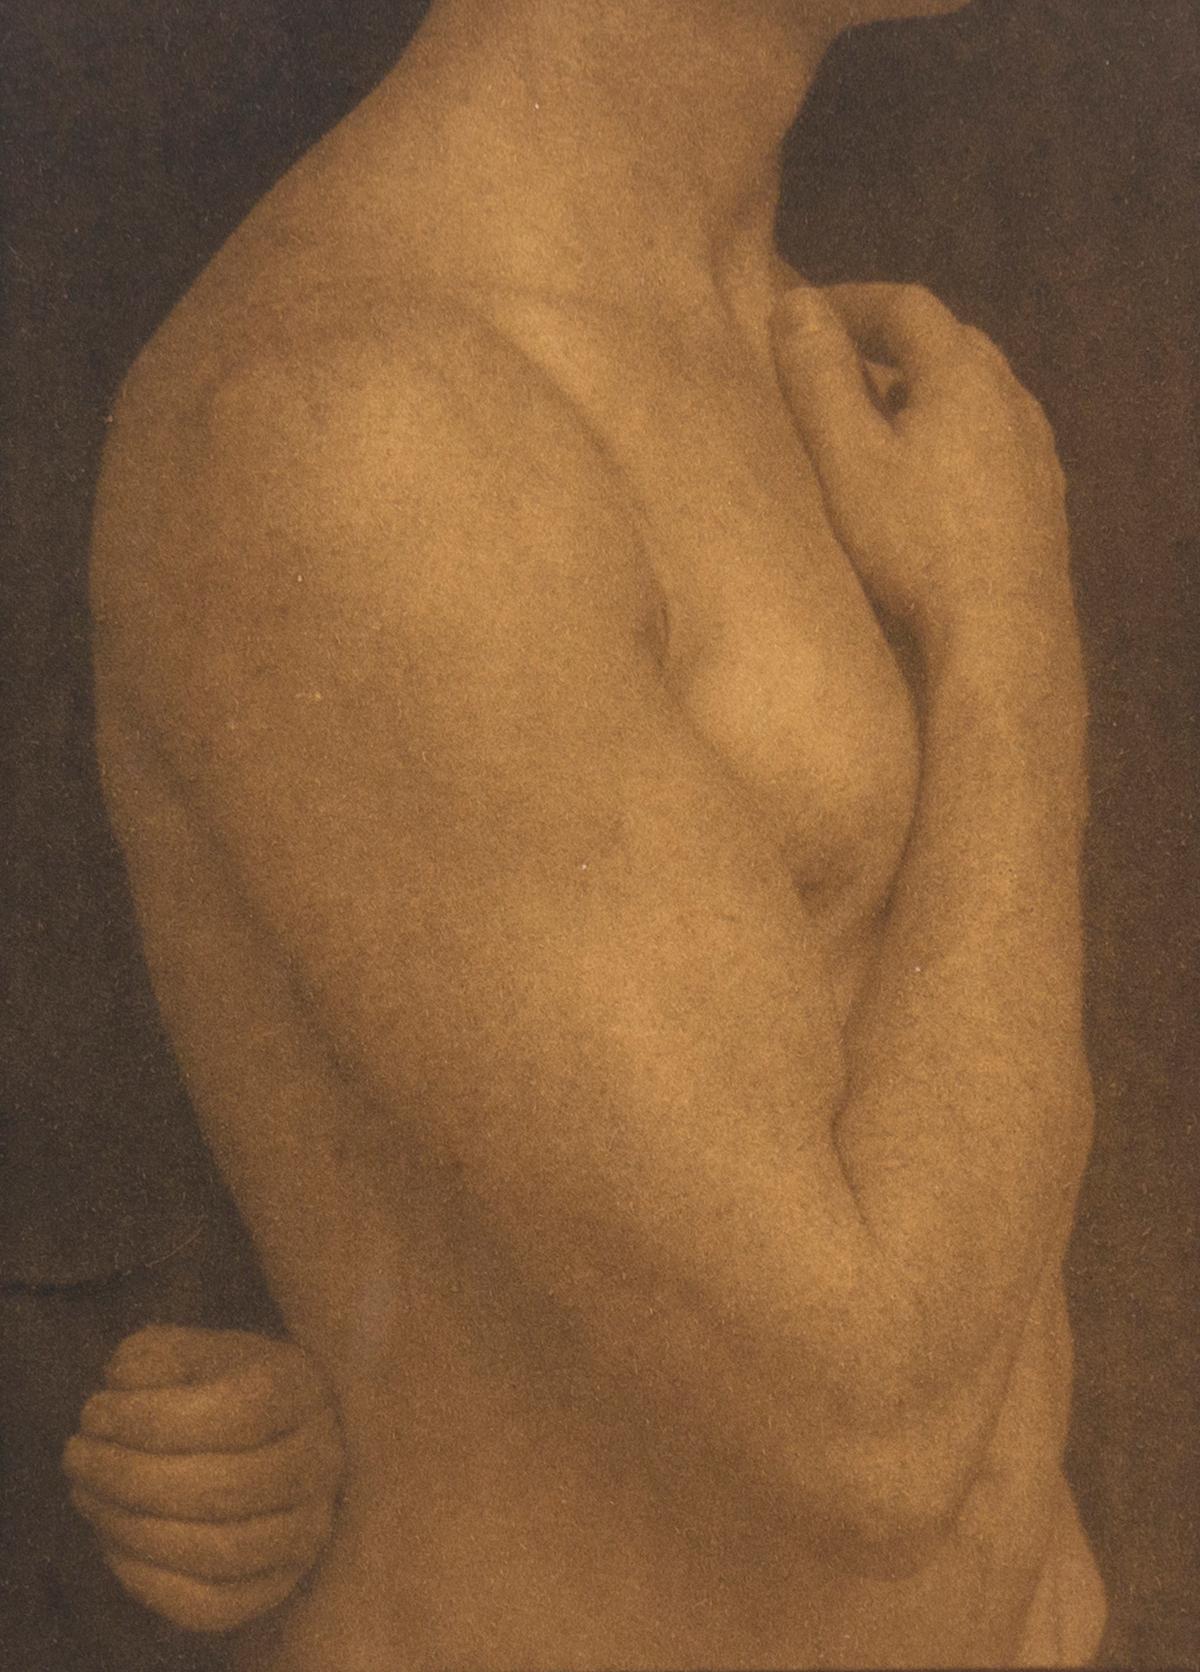 Torso 1 - Photograph by Curtice Taylor